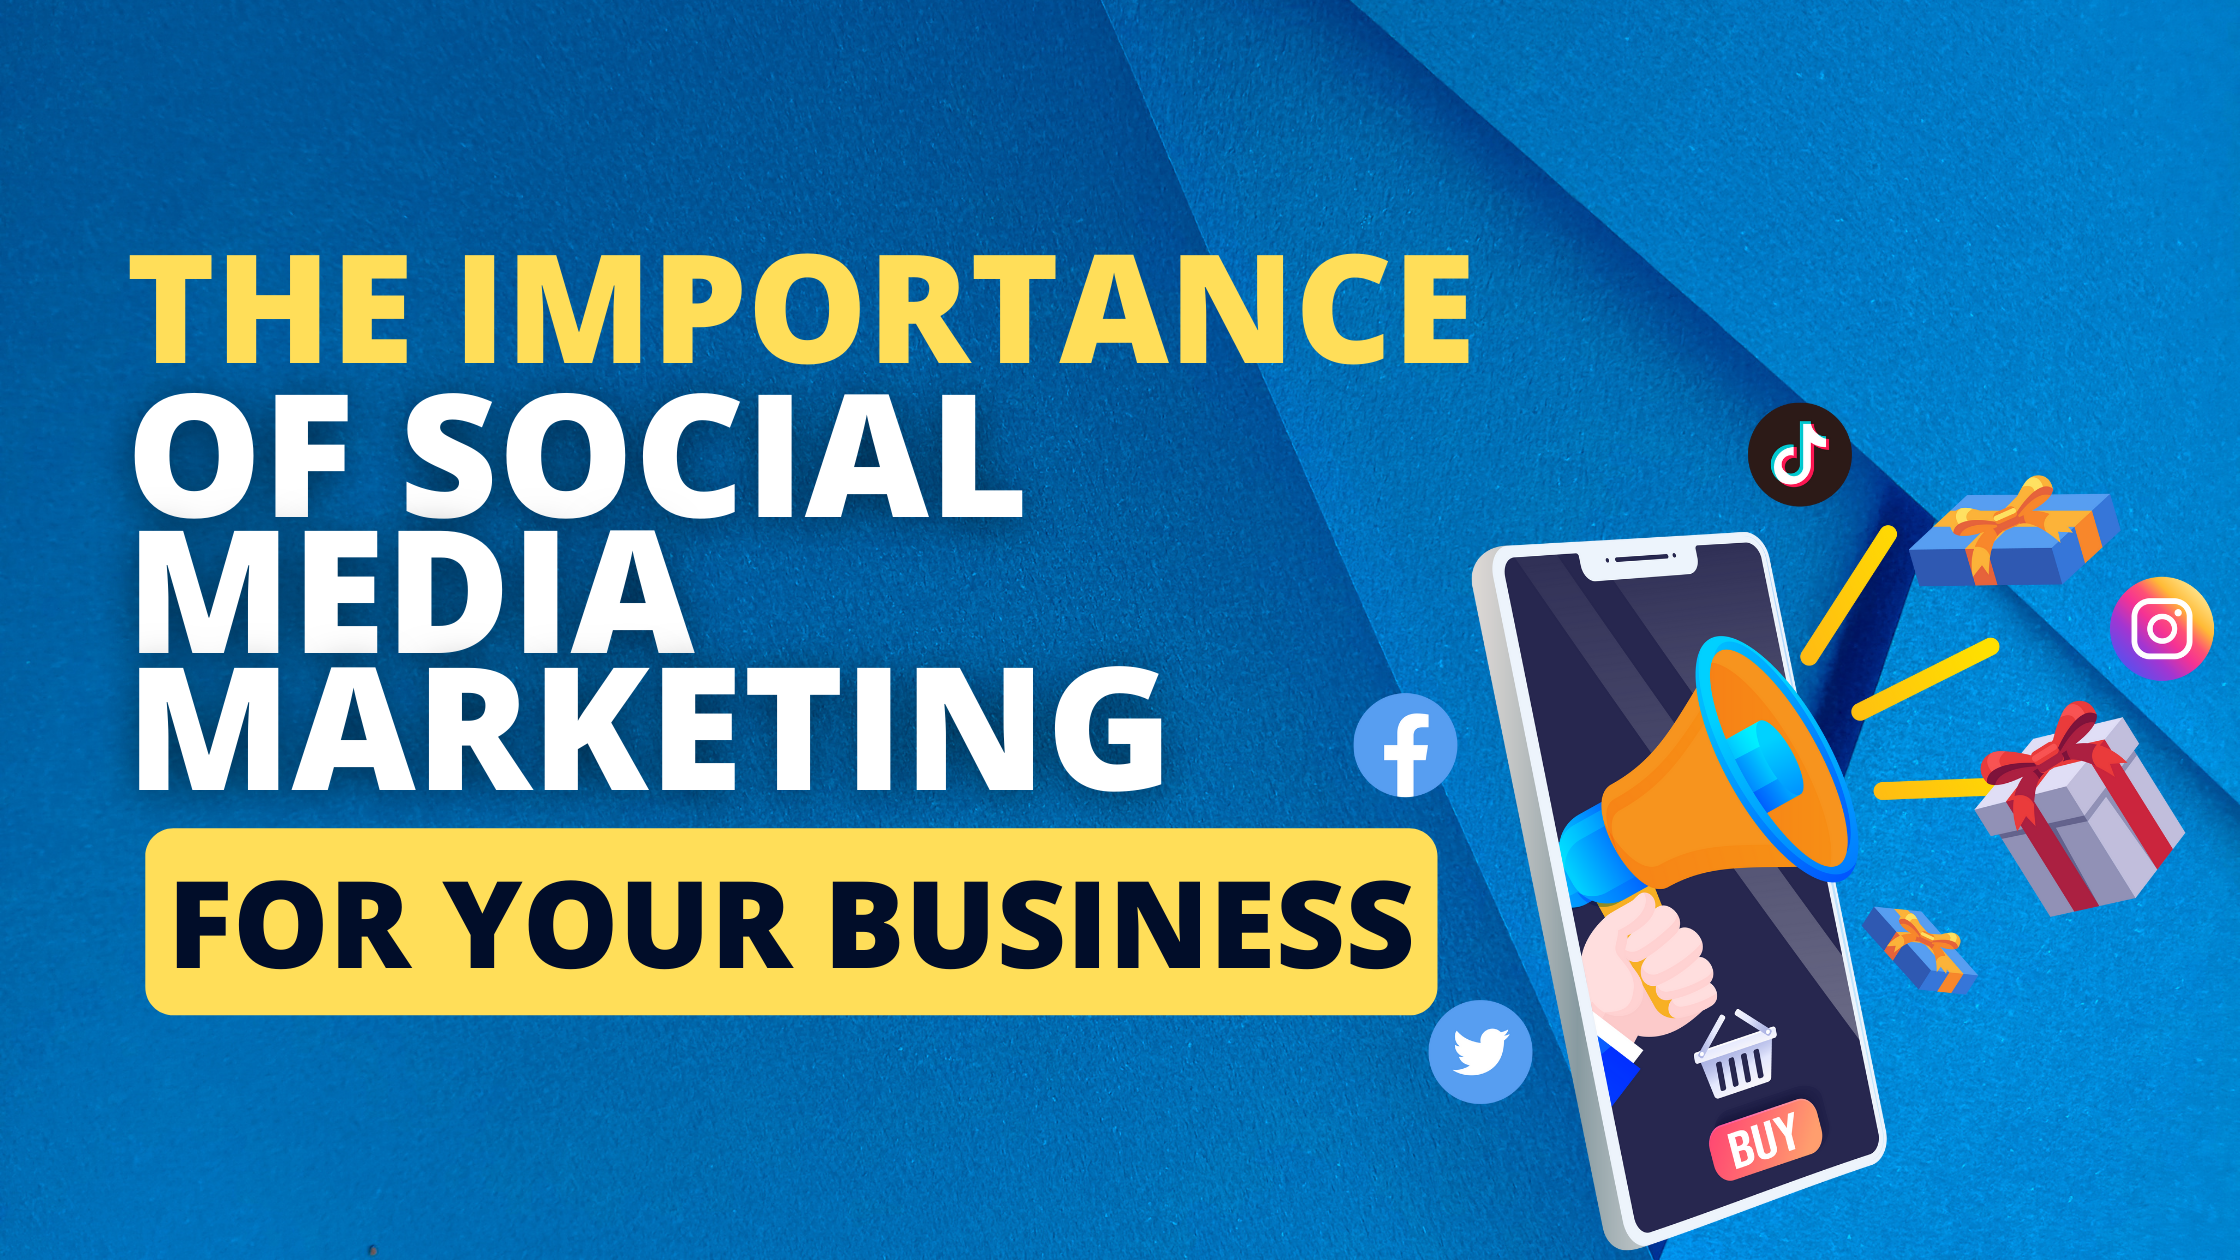 The Most Affordable Social Media Marketing Agency for Your Business Needs